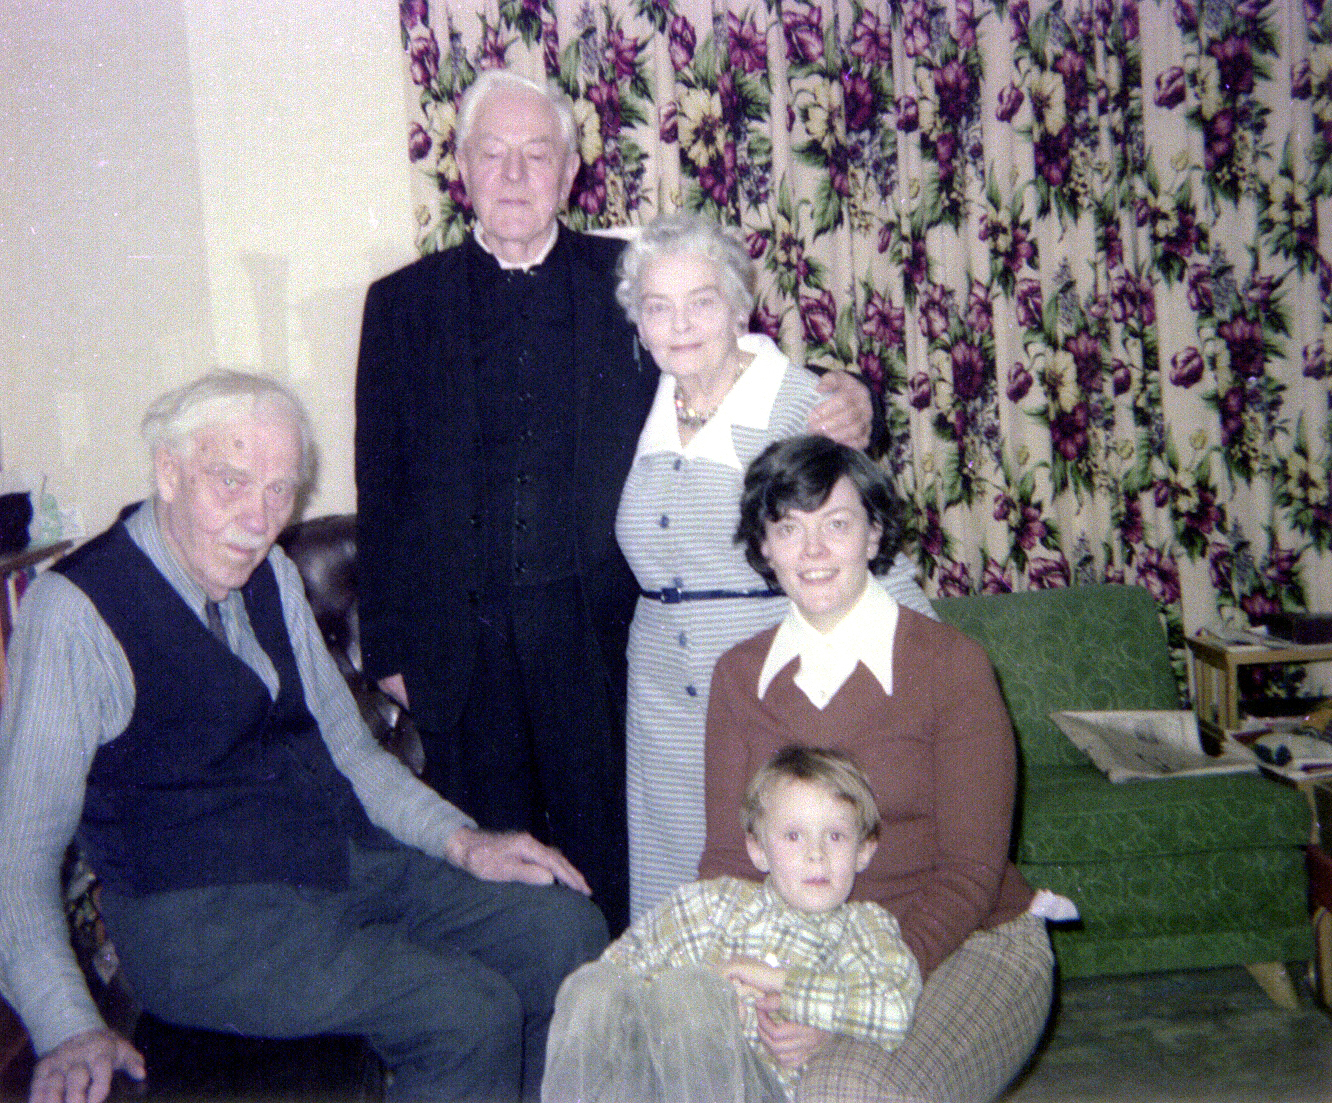 Frances and family members in 1974